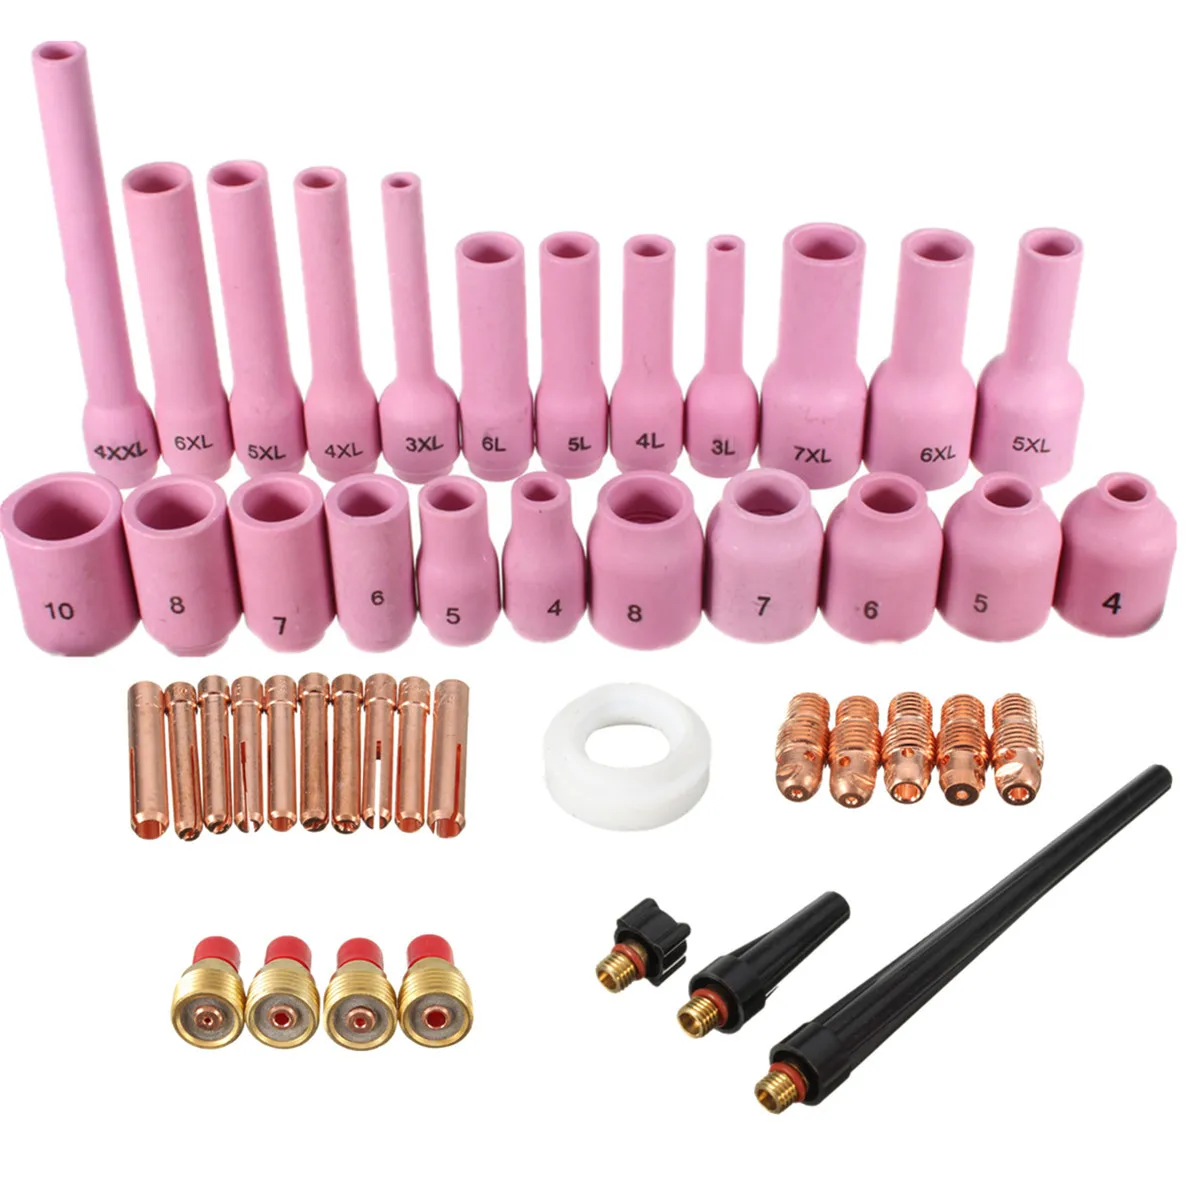 46PCS For SR WP9 20 25 TIG Welding Torch Gu n TIG Torches Kit Nozzle Back Cap Collet Body Welding Accessories